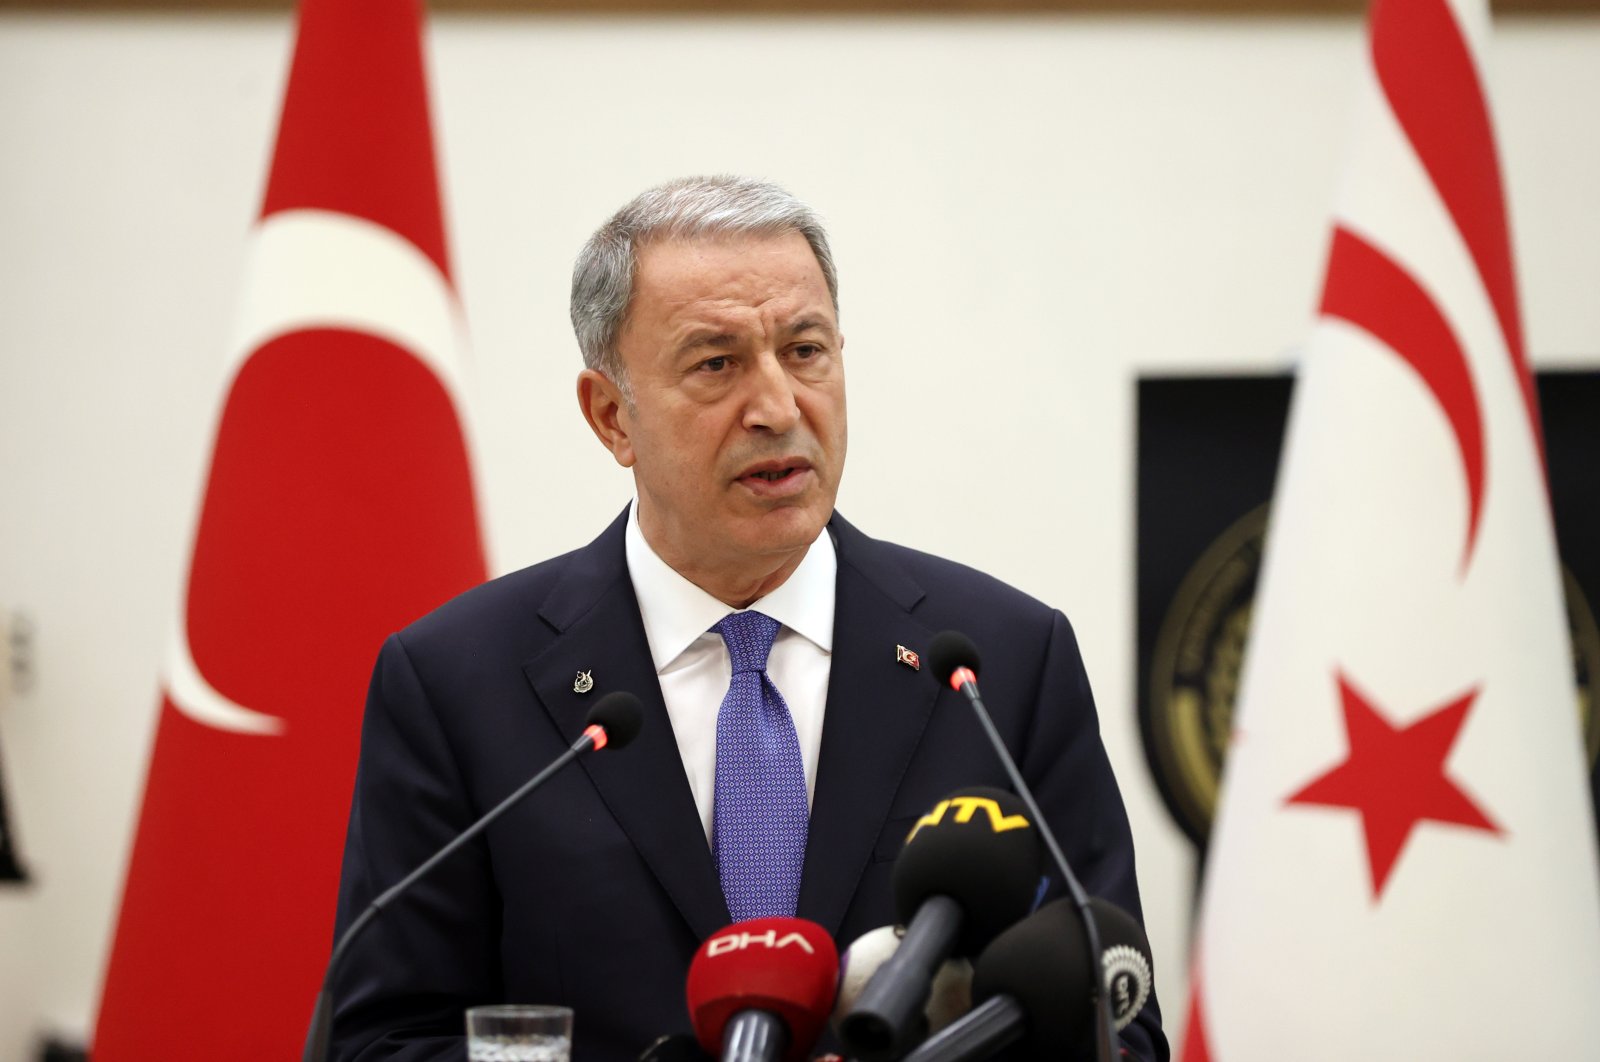 Defense Minister Hulusi Akar speaks at the Turkish Republic of Northern Cyprus (TRNC) Social Resistance and Armed Forces Day Reception in the capital Ankara, Turkey, Aug. 2, 2022. (AA Photo)